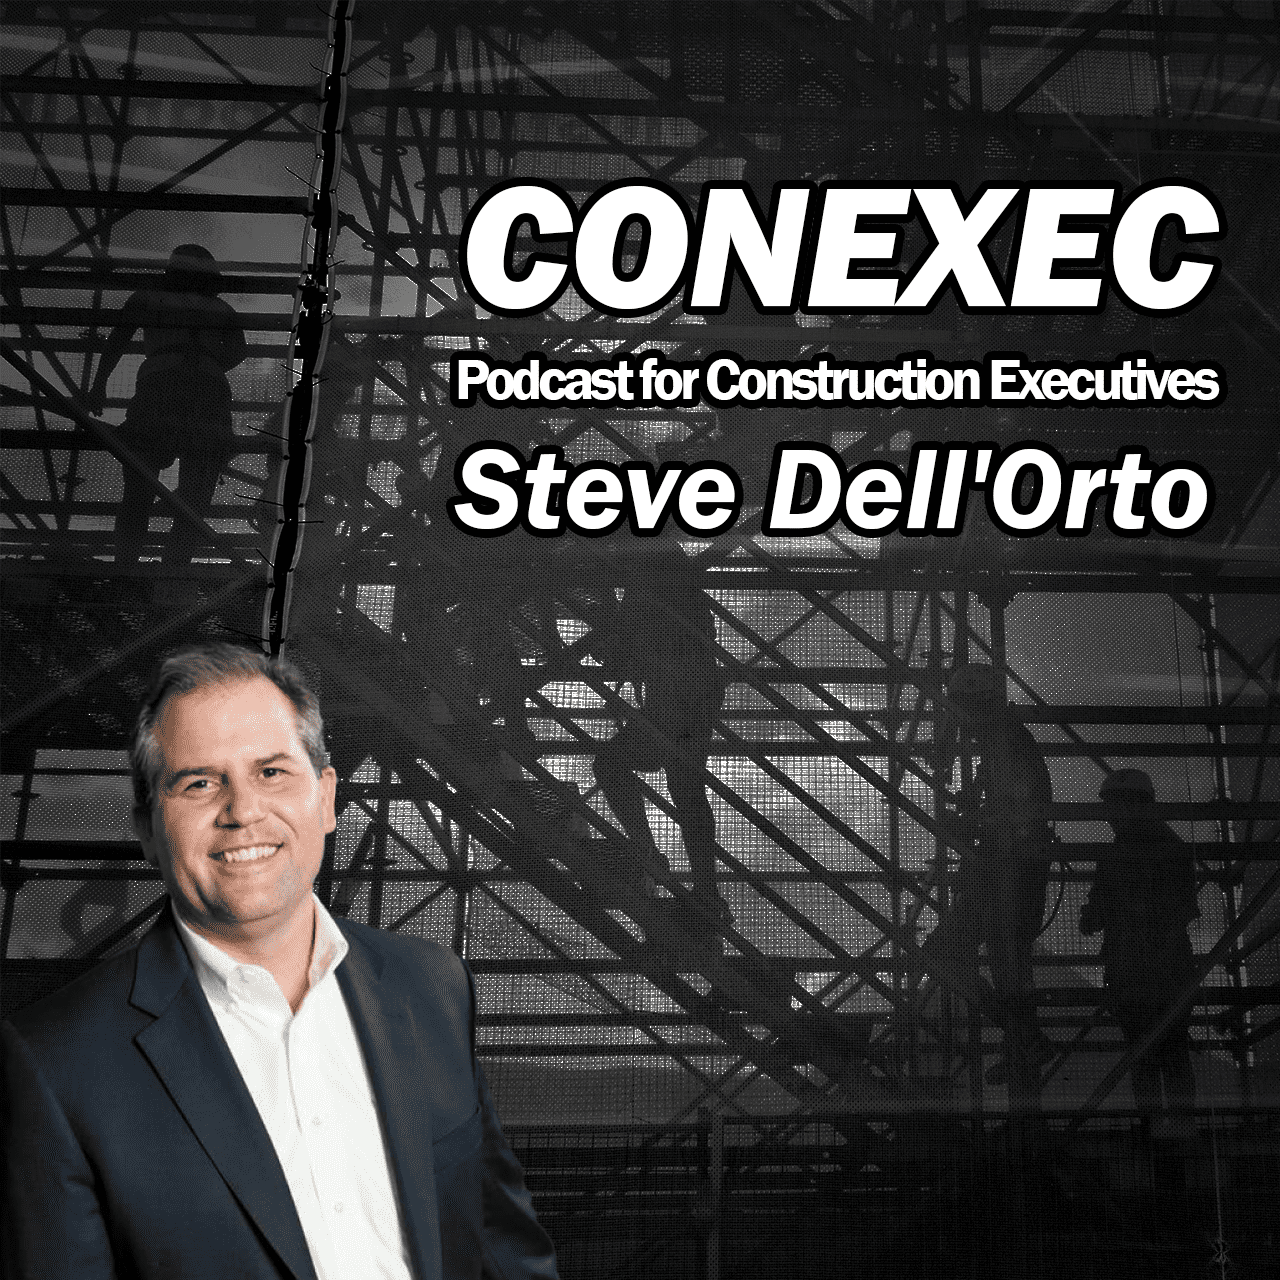 Steve Dell'Orto, Founder and CEO of ConCntric